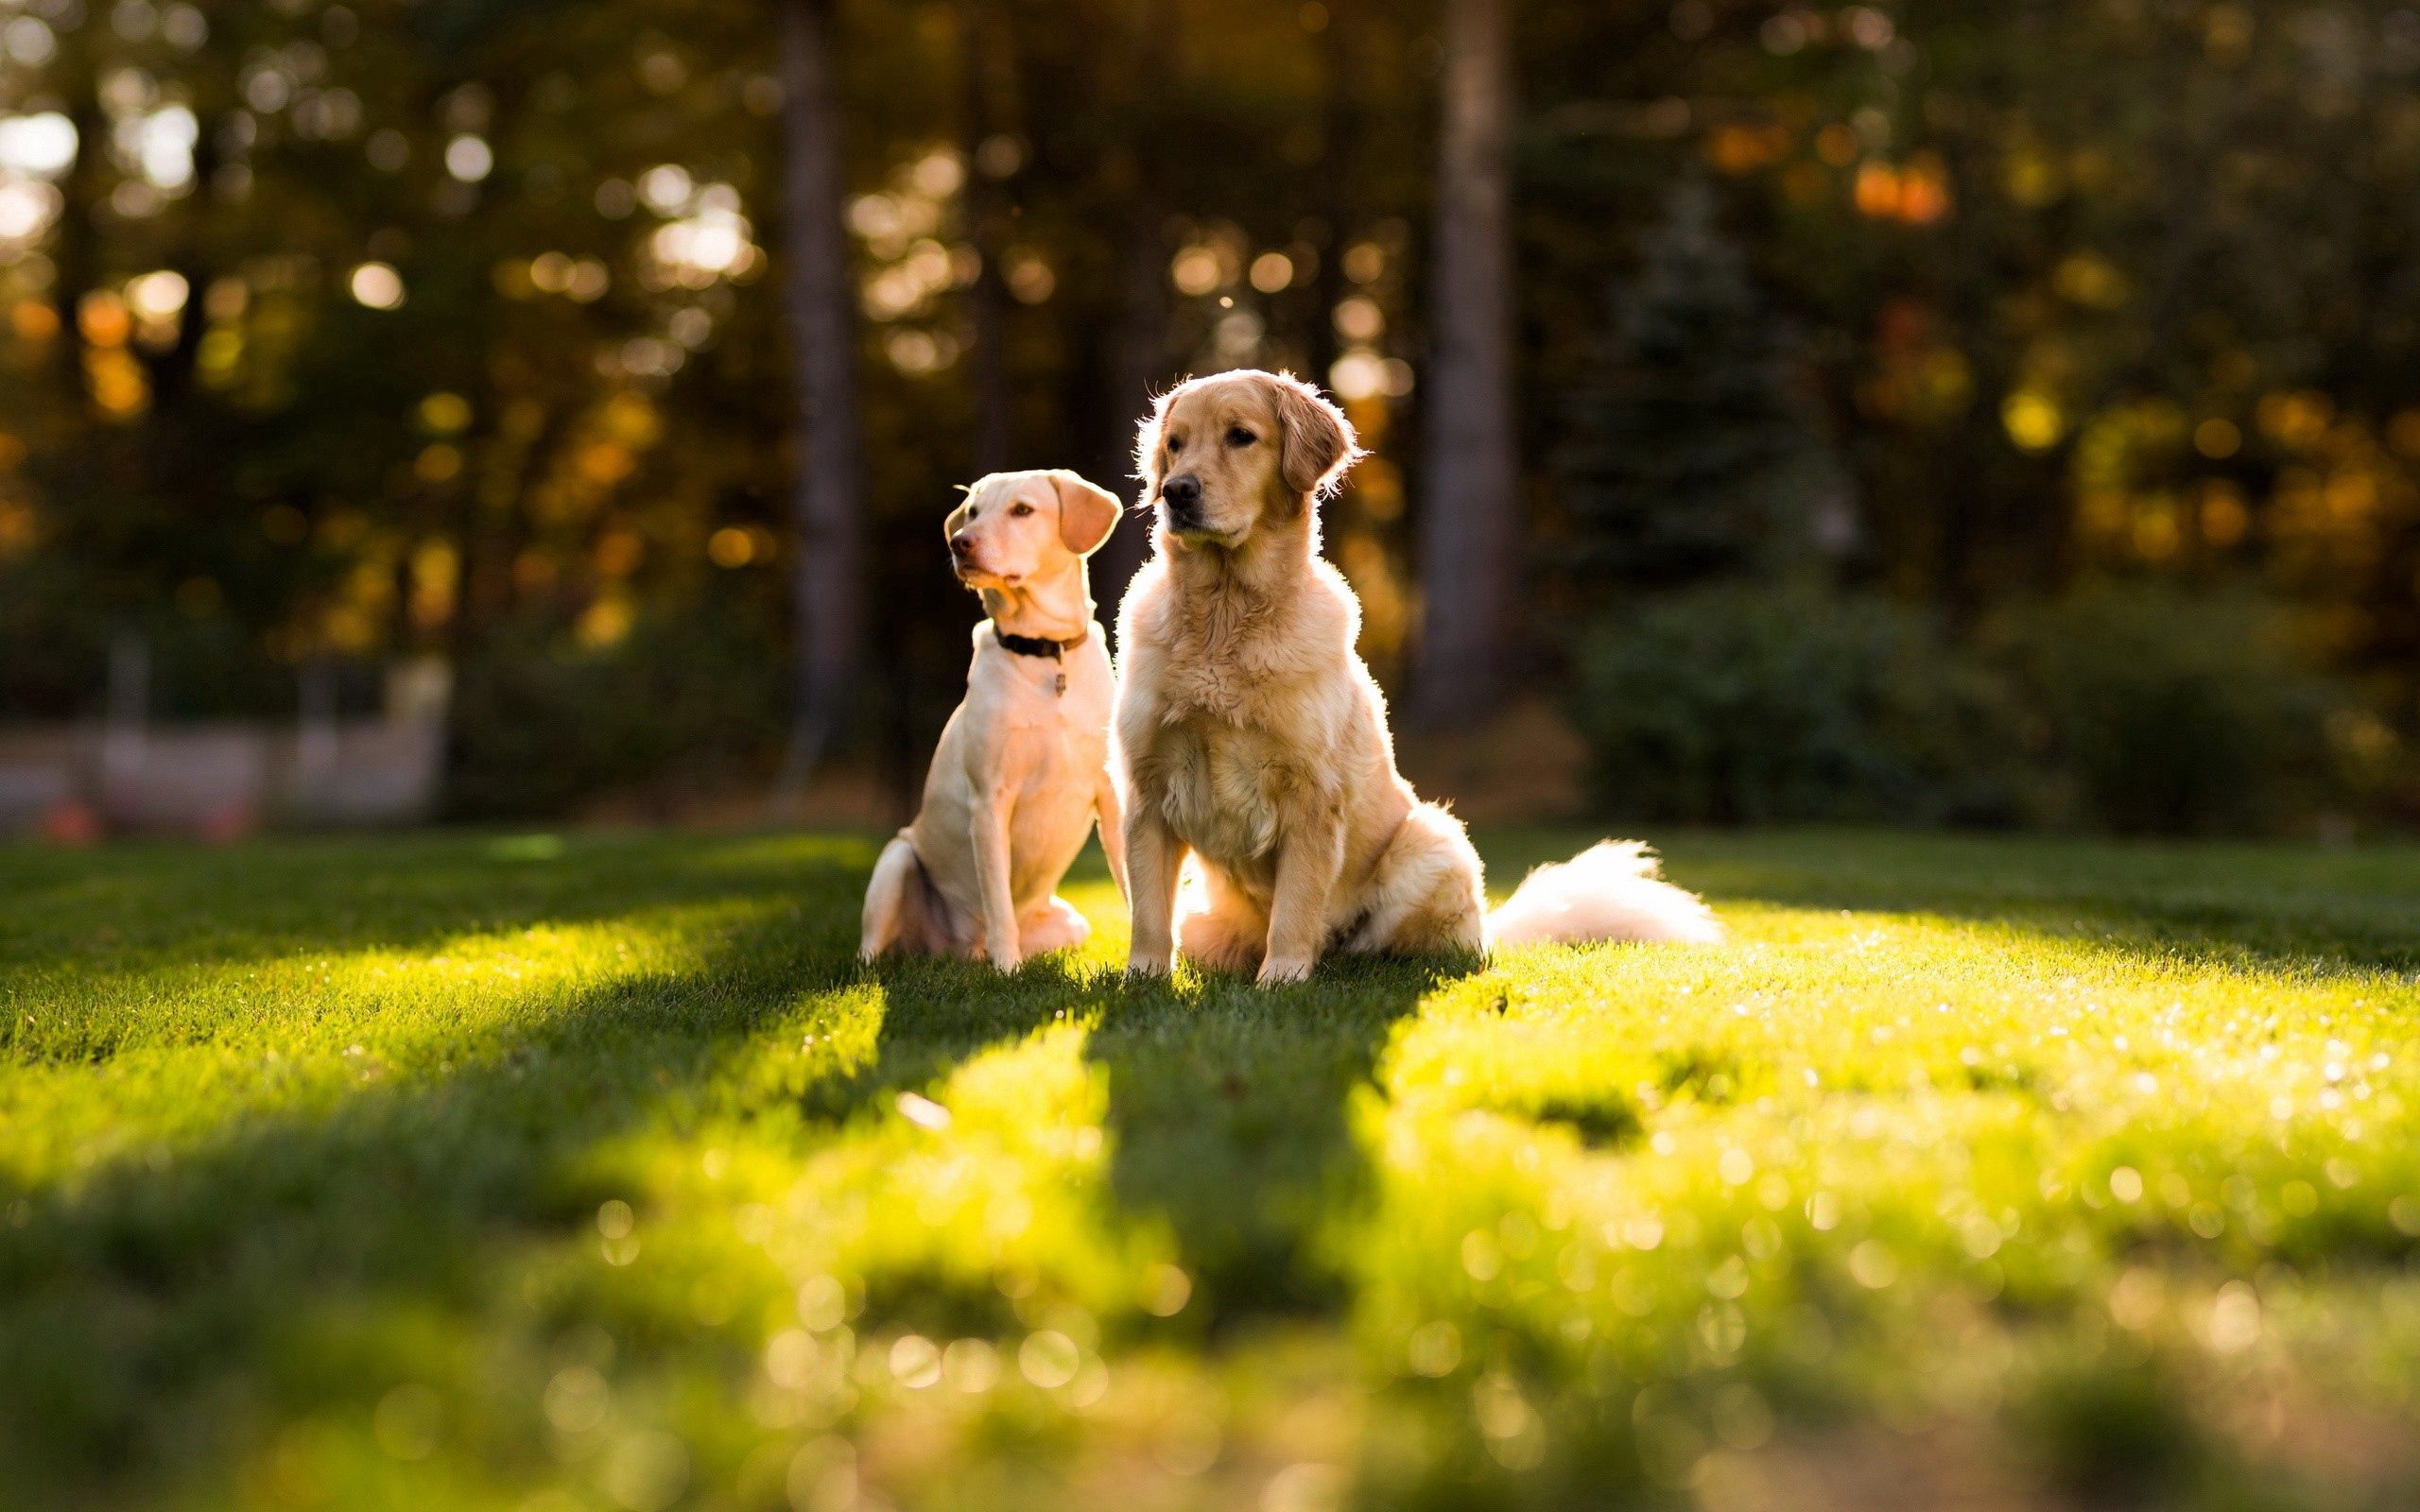 102762 download wallpaper couple, animals, dogs, grass, shine, light, pair screensavers and pictures for free